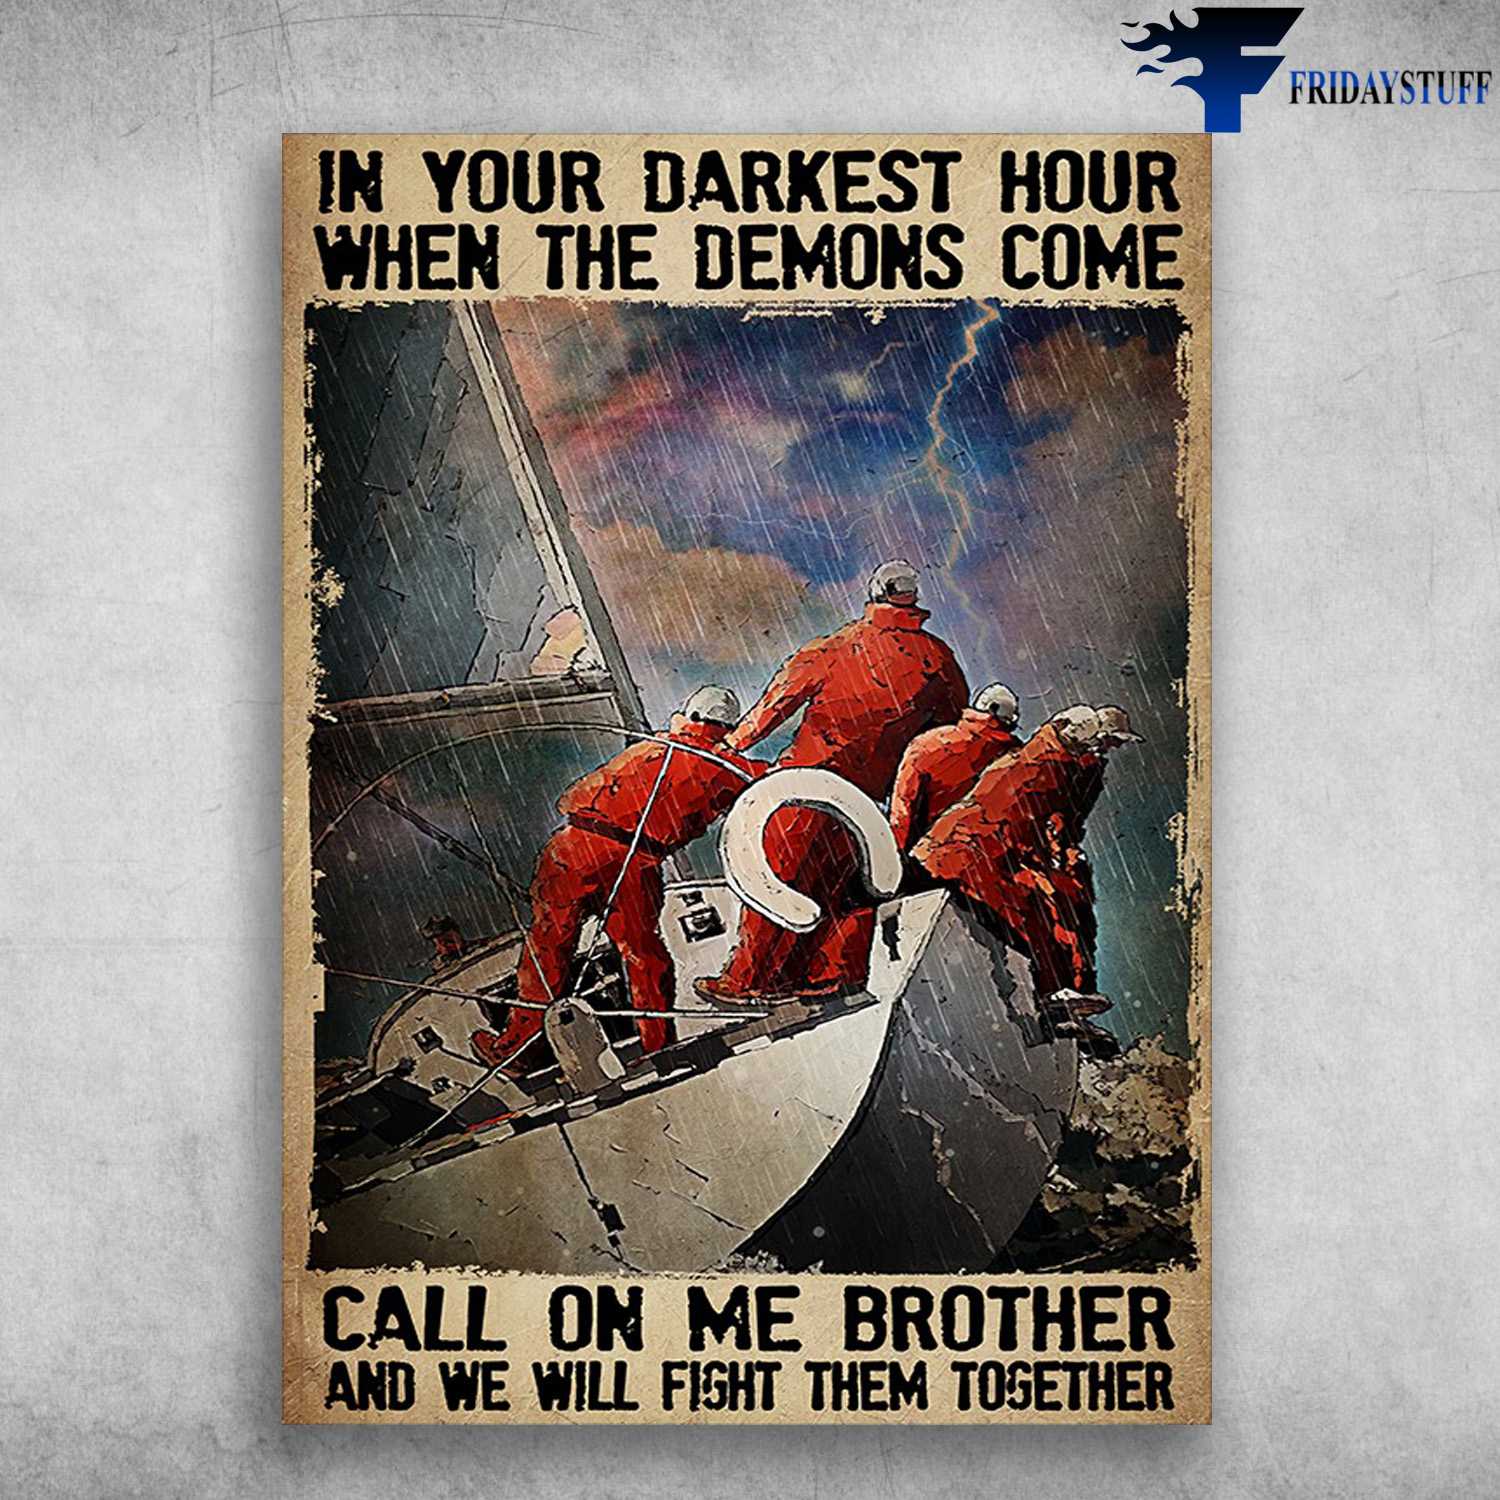 Sailor In Storm - In Your Darknest Hour, When The Demons Come, Call On Me Brother, And We Will Fight Them Together